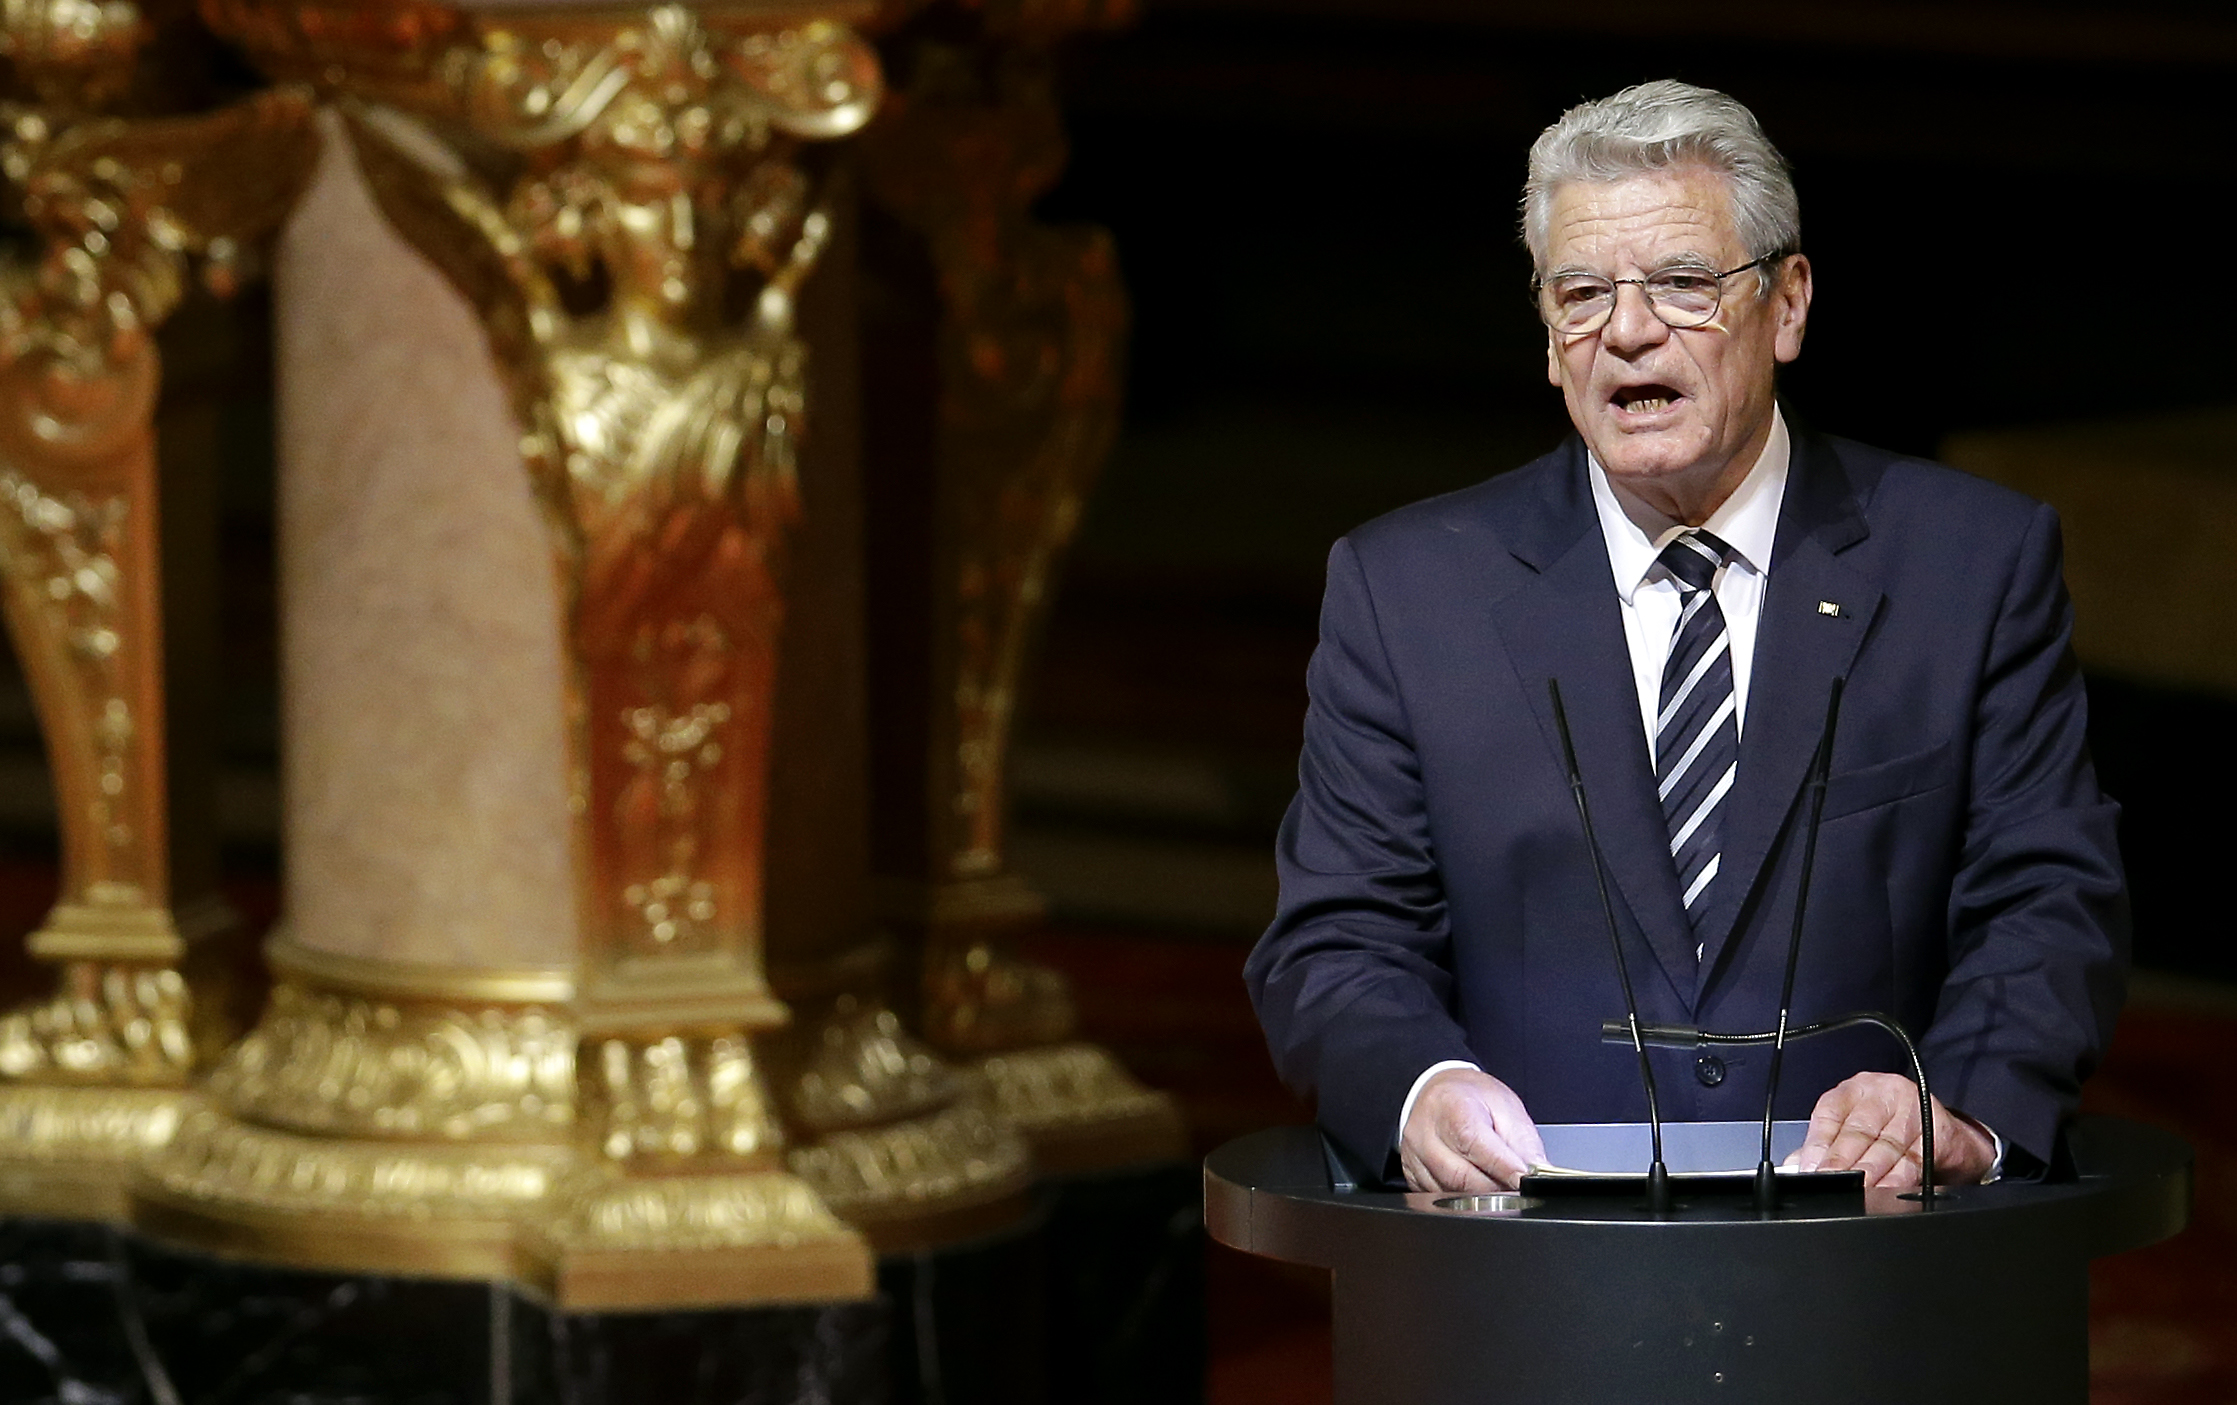 German President Joachim Gauck delivers a speech at the Berlin Cathedral Church in Berlin, Germany, April 23, 2015 (Michael Sohn—AP)